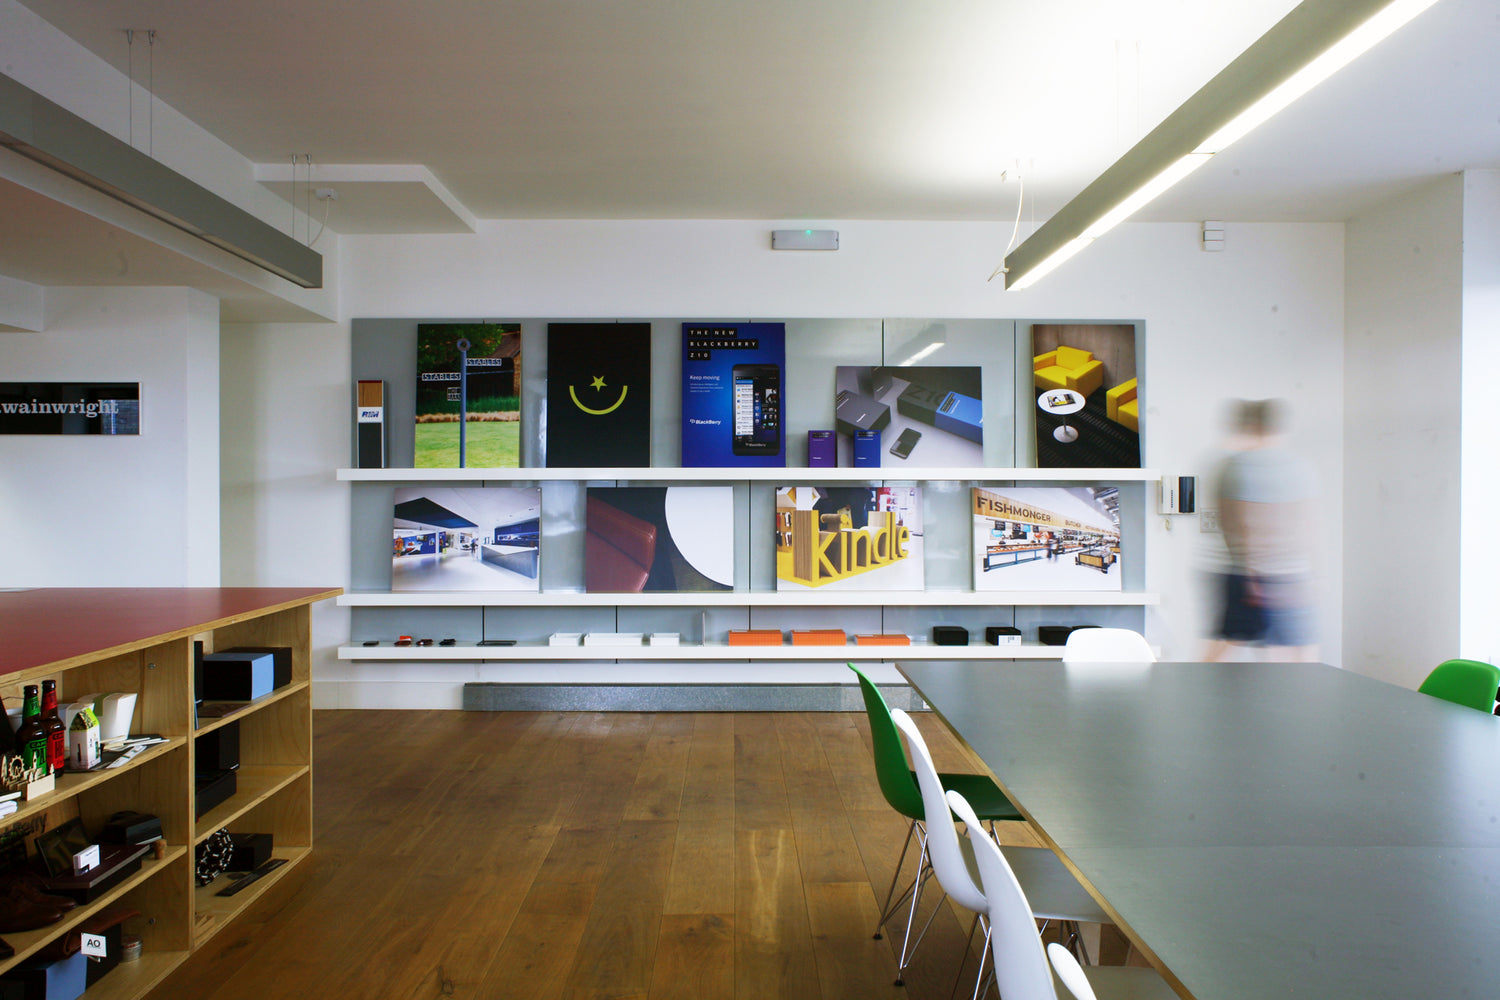 Design office with shelving wall display